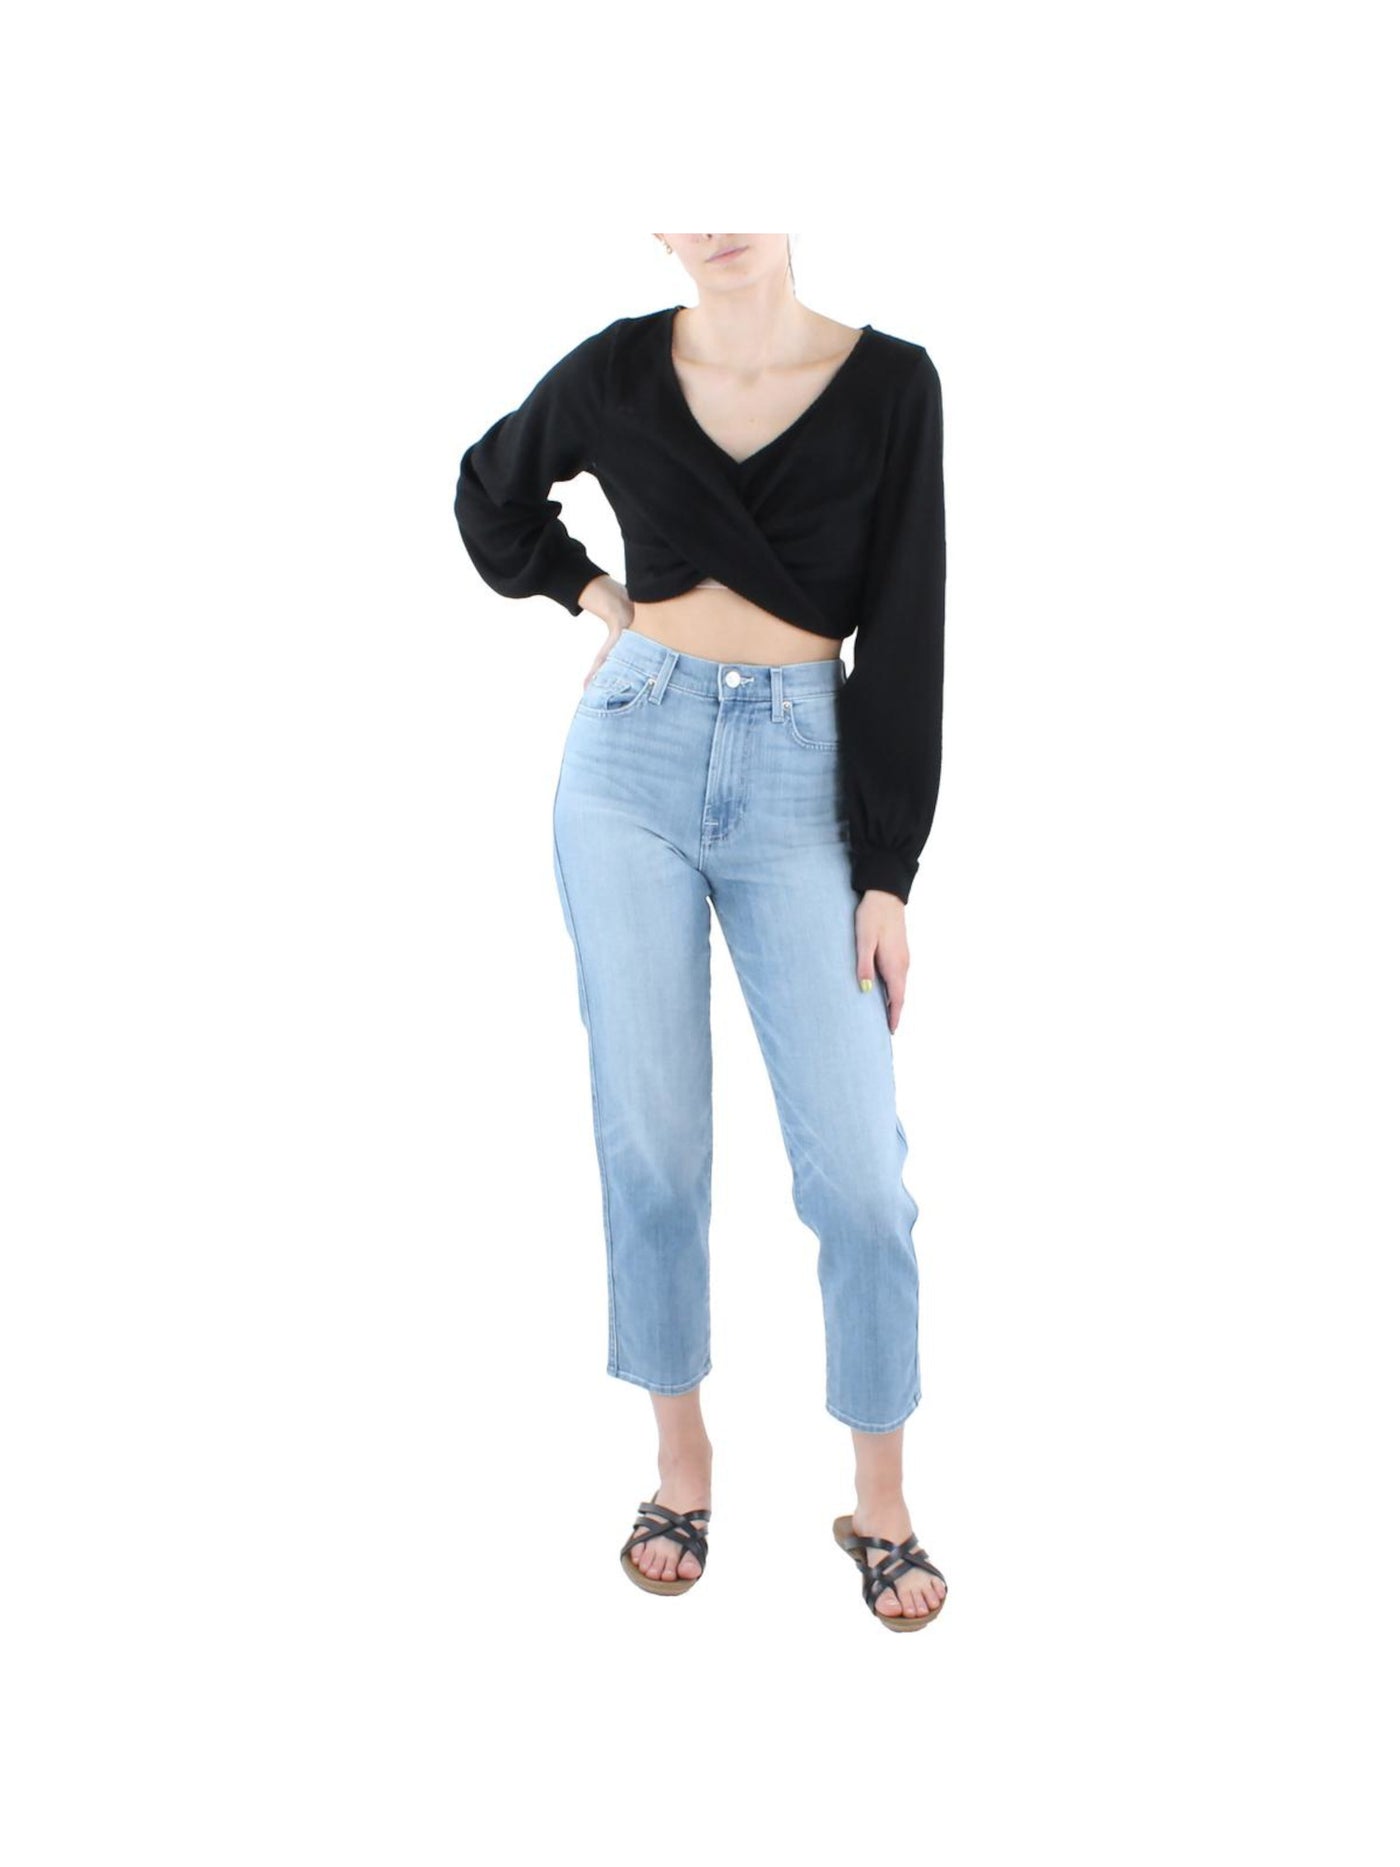 ALMOST FAMOUS Womens Black Knit Ribbed Twist Front Long Sleeve V Neck Crop Top Juniors L